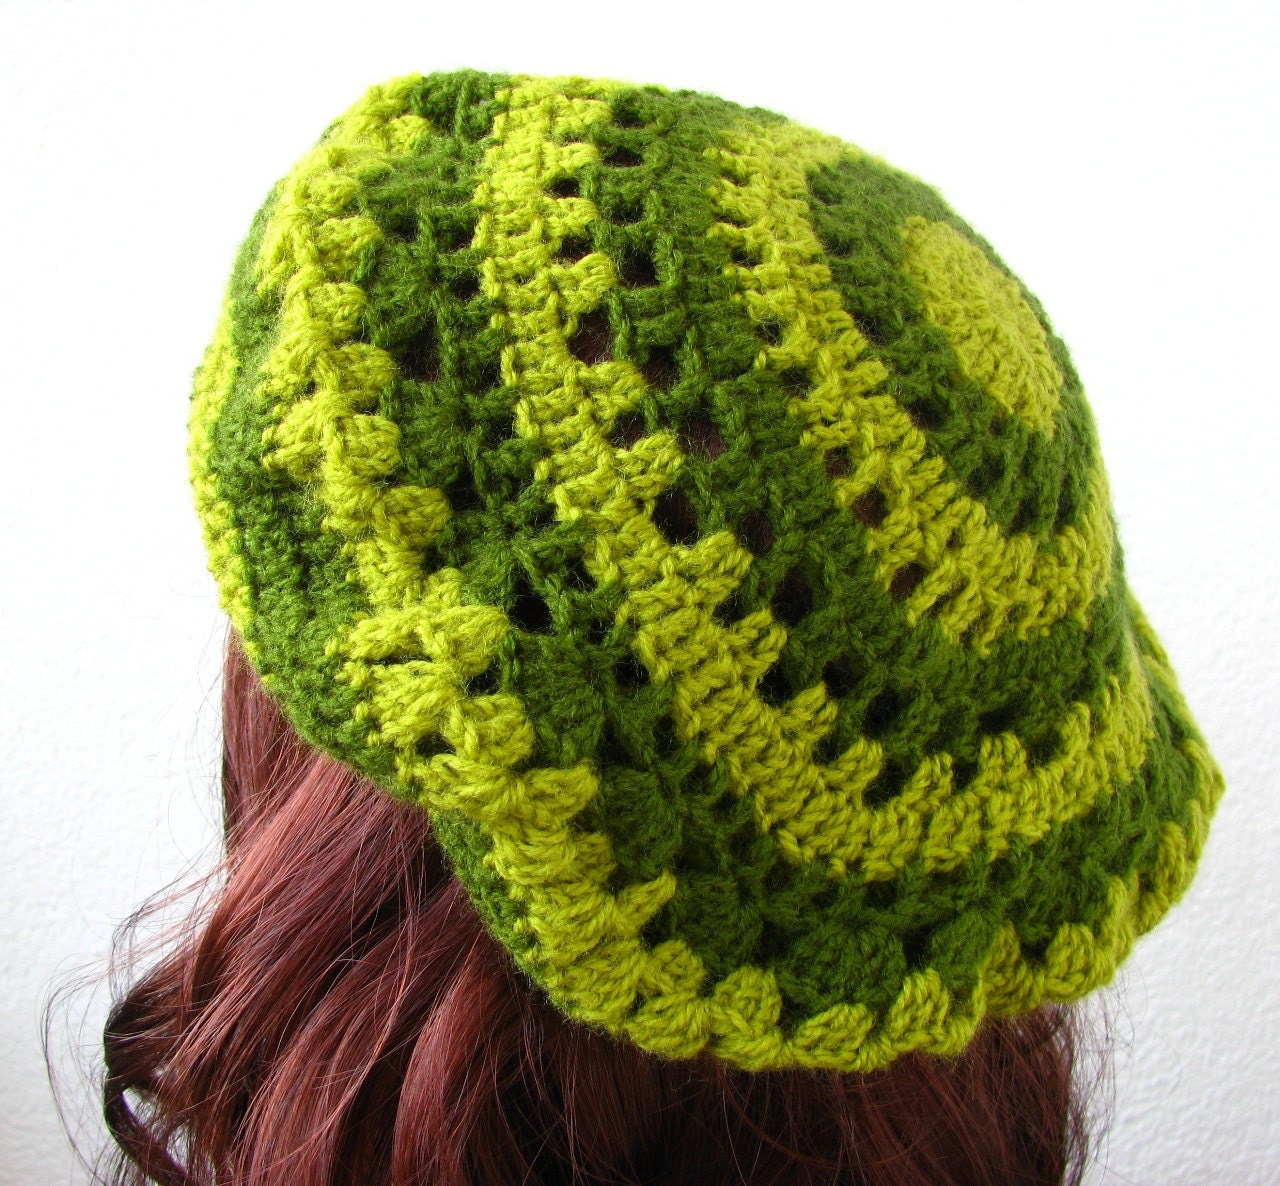 Crocheted tam, beret, green striped hat winter accessories, forest green - delectare